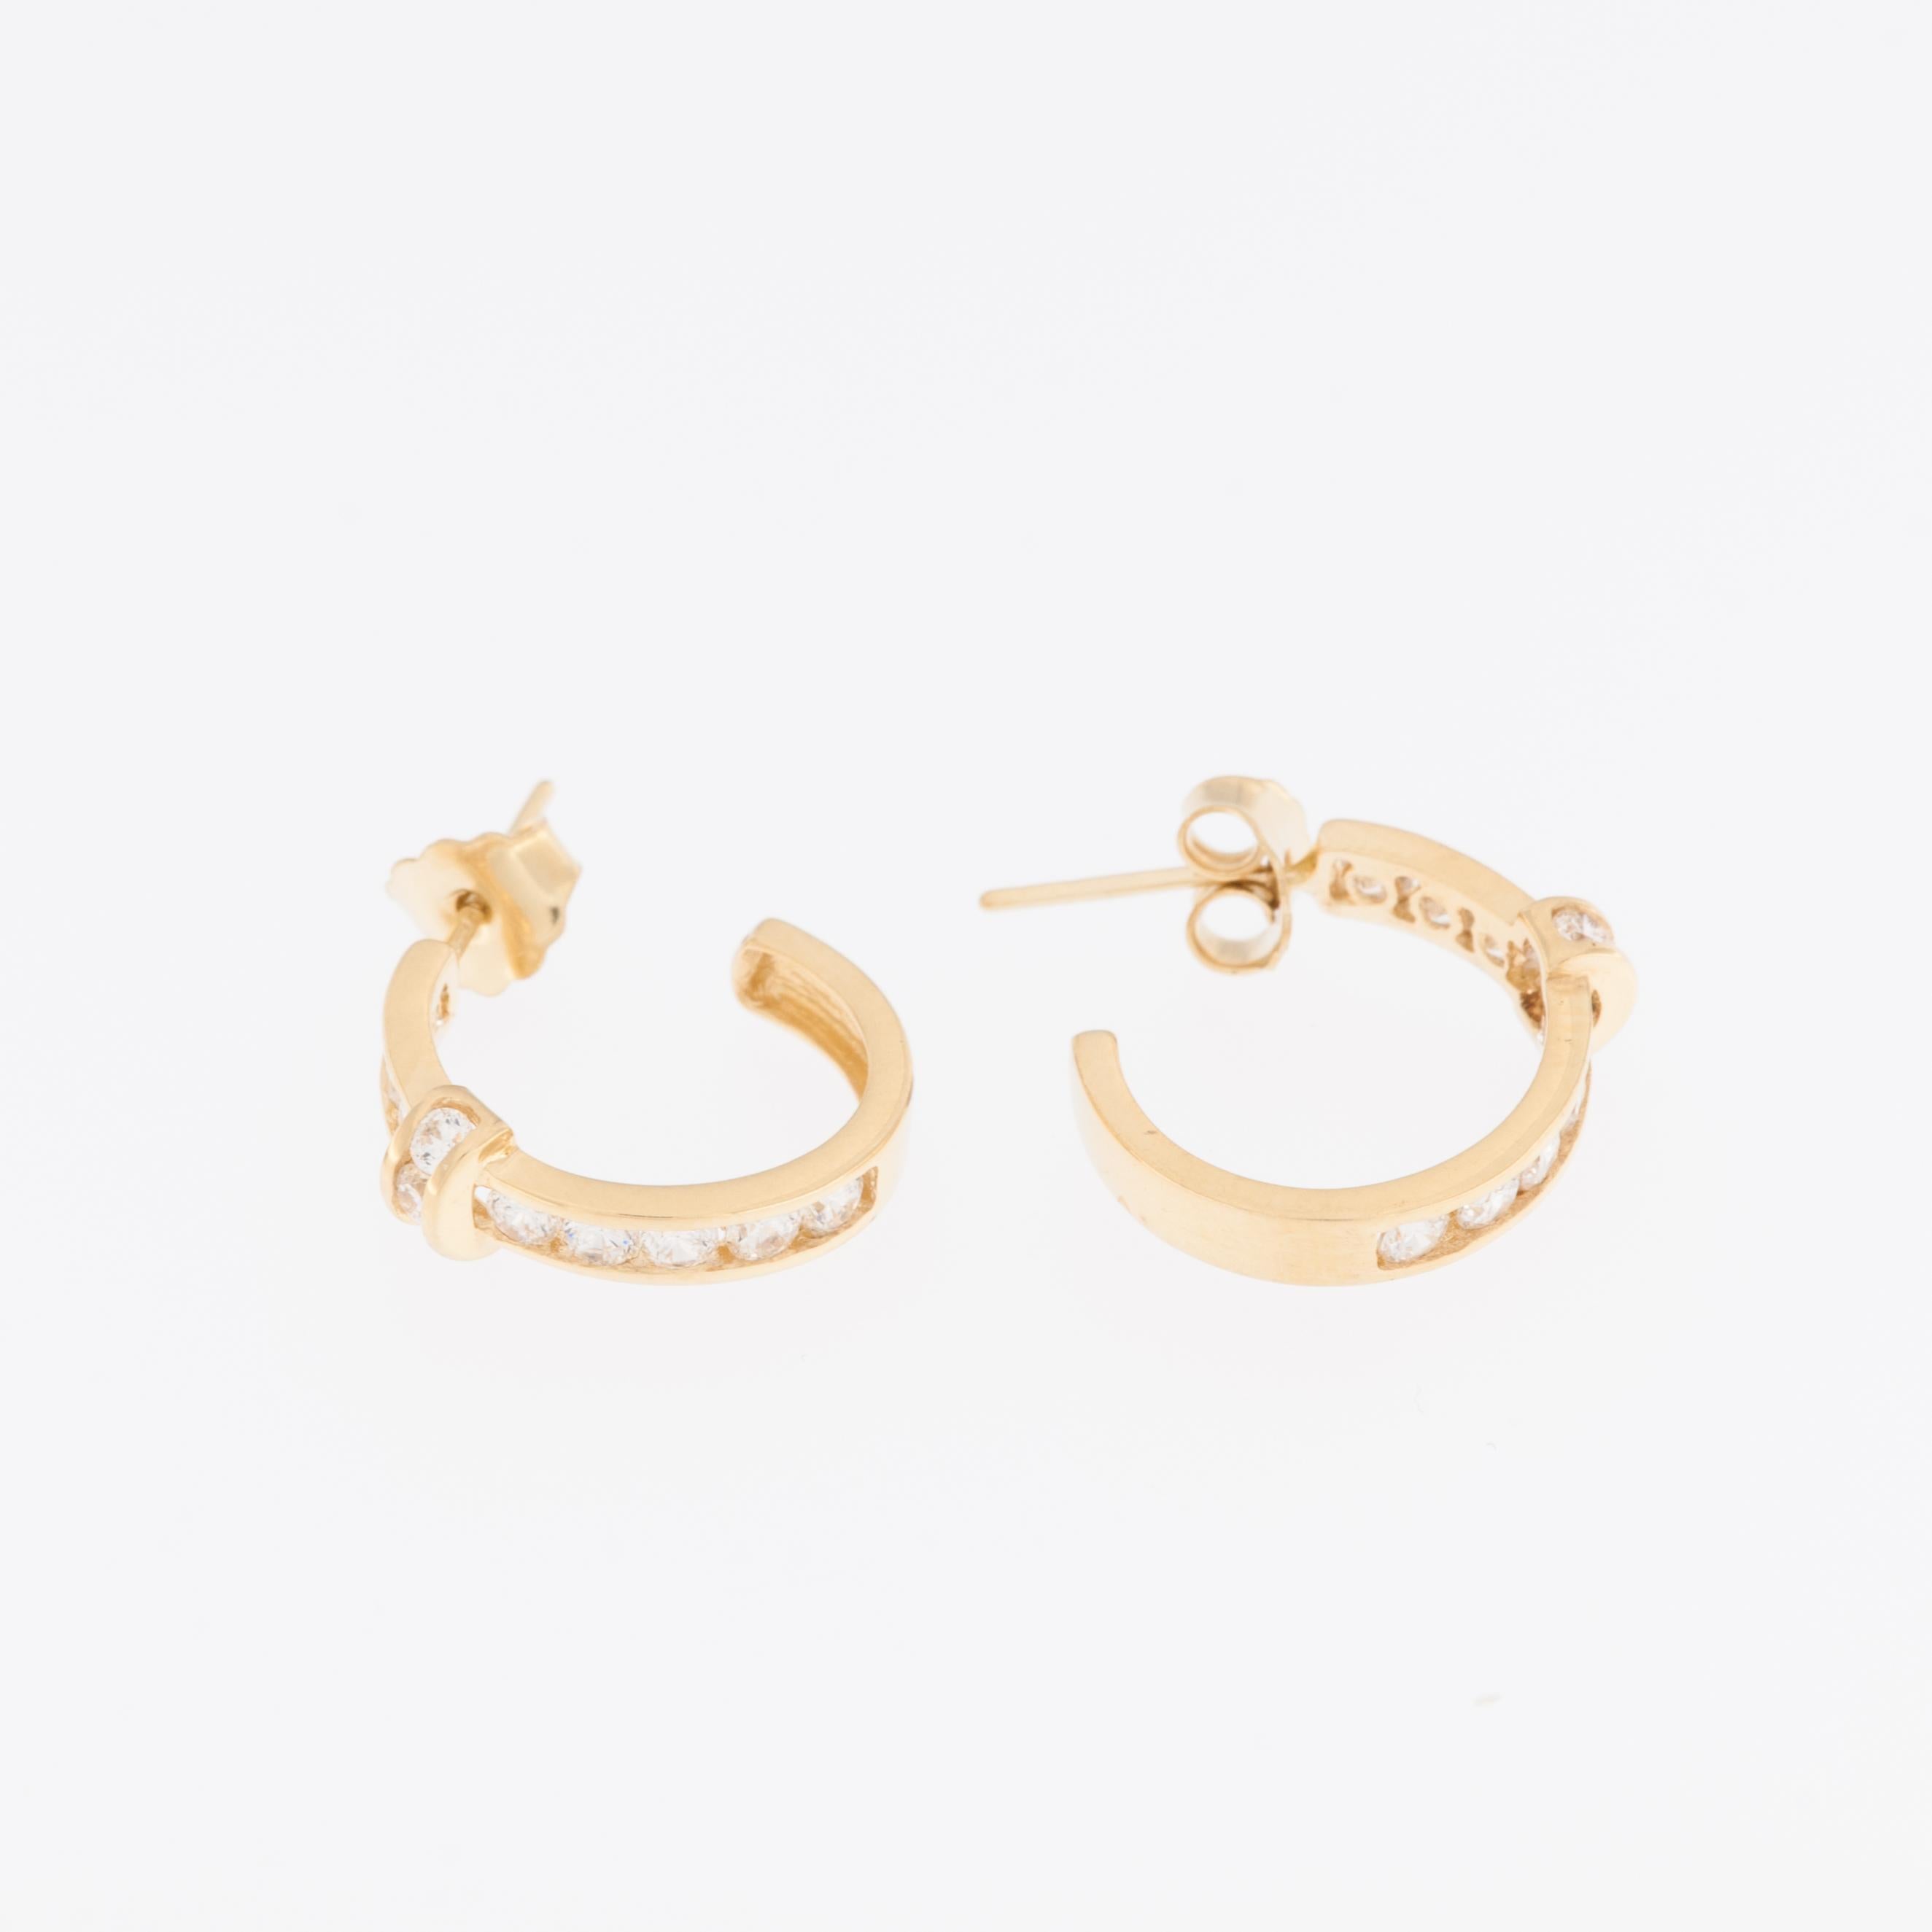 Swiss Vintage 18kt Yellow Gold Earrings with Diamonds are a stunning and timeless jewelry accessory. 

These earrings are crafted from 18-karat yellow gold, a precious metal known for its durability and rich, warm color. The use of 18kt gold